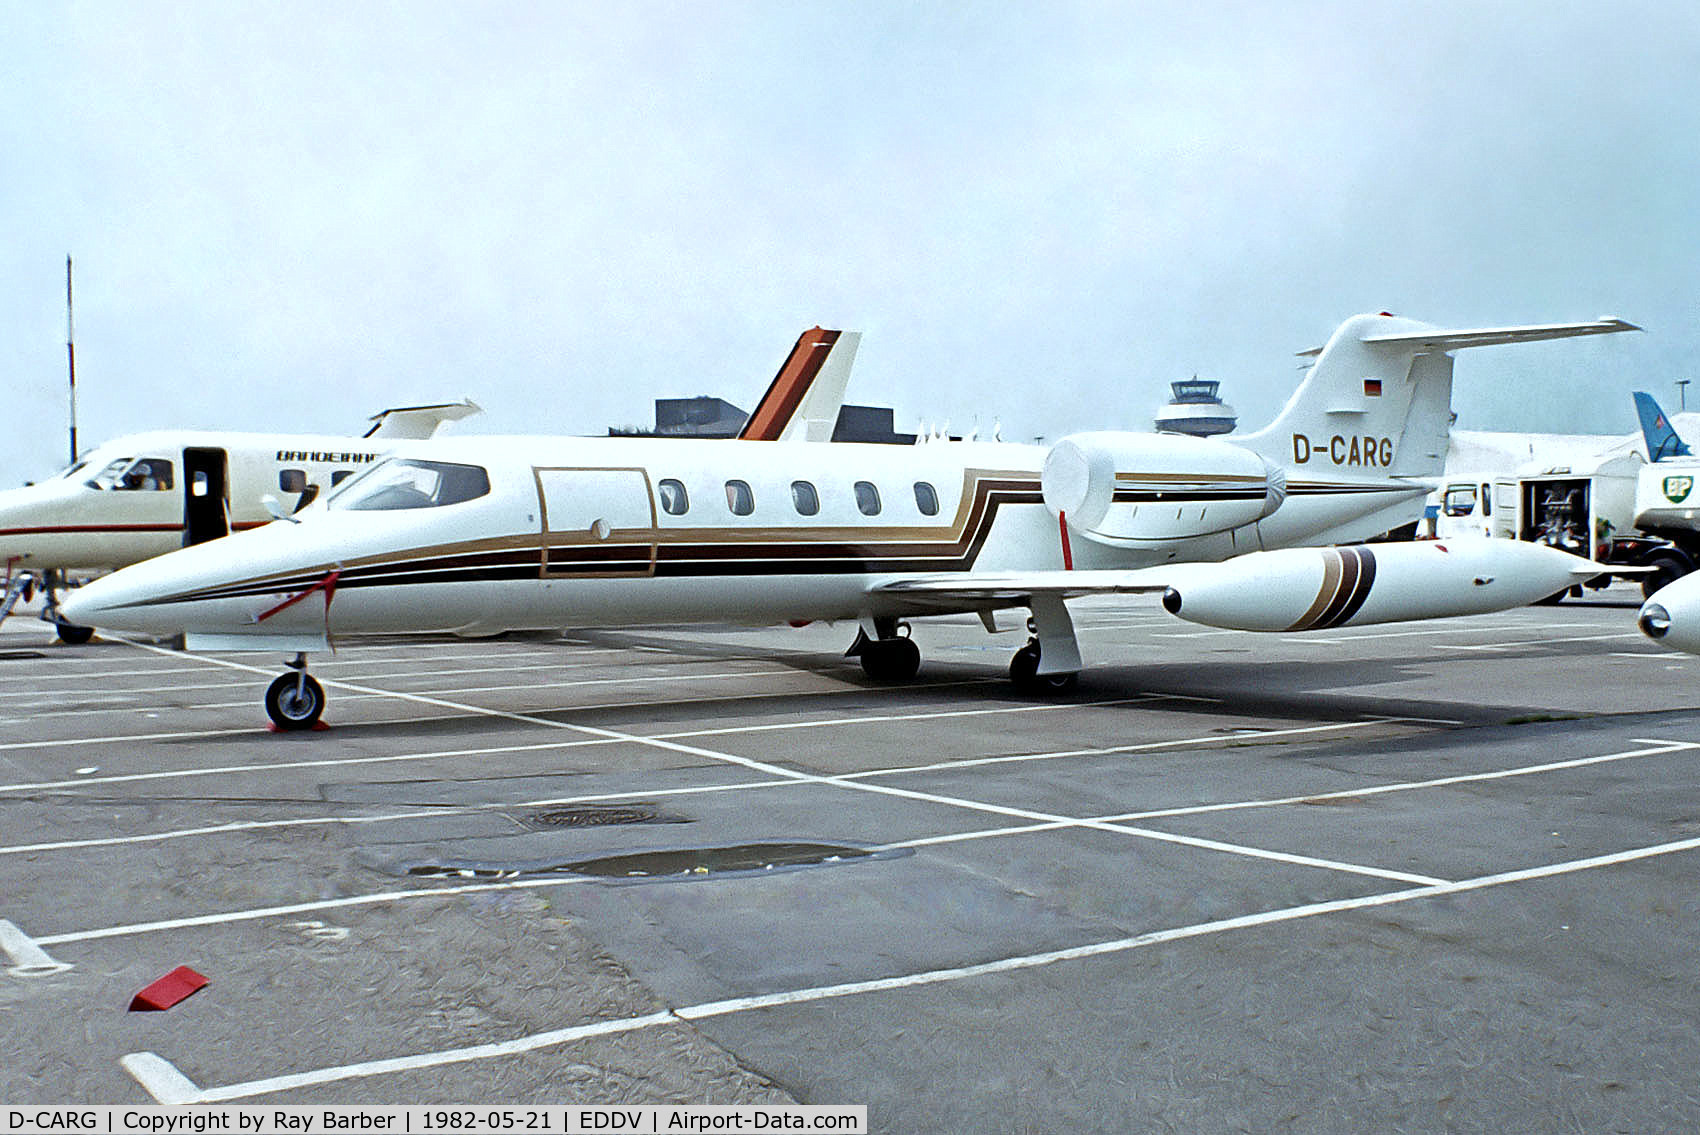 D-CARG, 1981 Gates Learjet 35A C/N 433, Learjet 35A [35A-433] (Aero Dienst) Hannover~D 21/05/1982. From a slide.